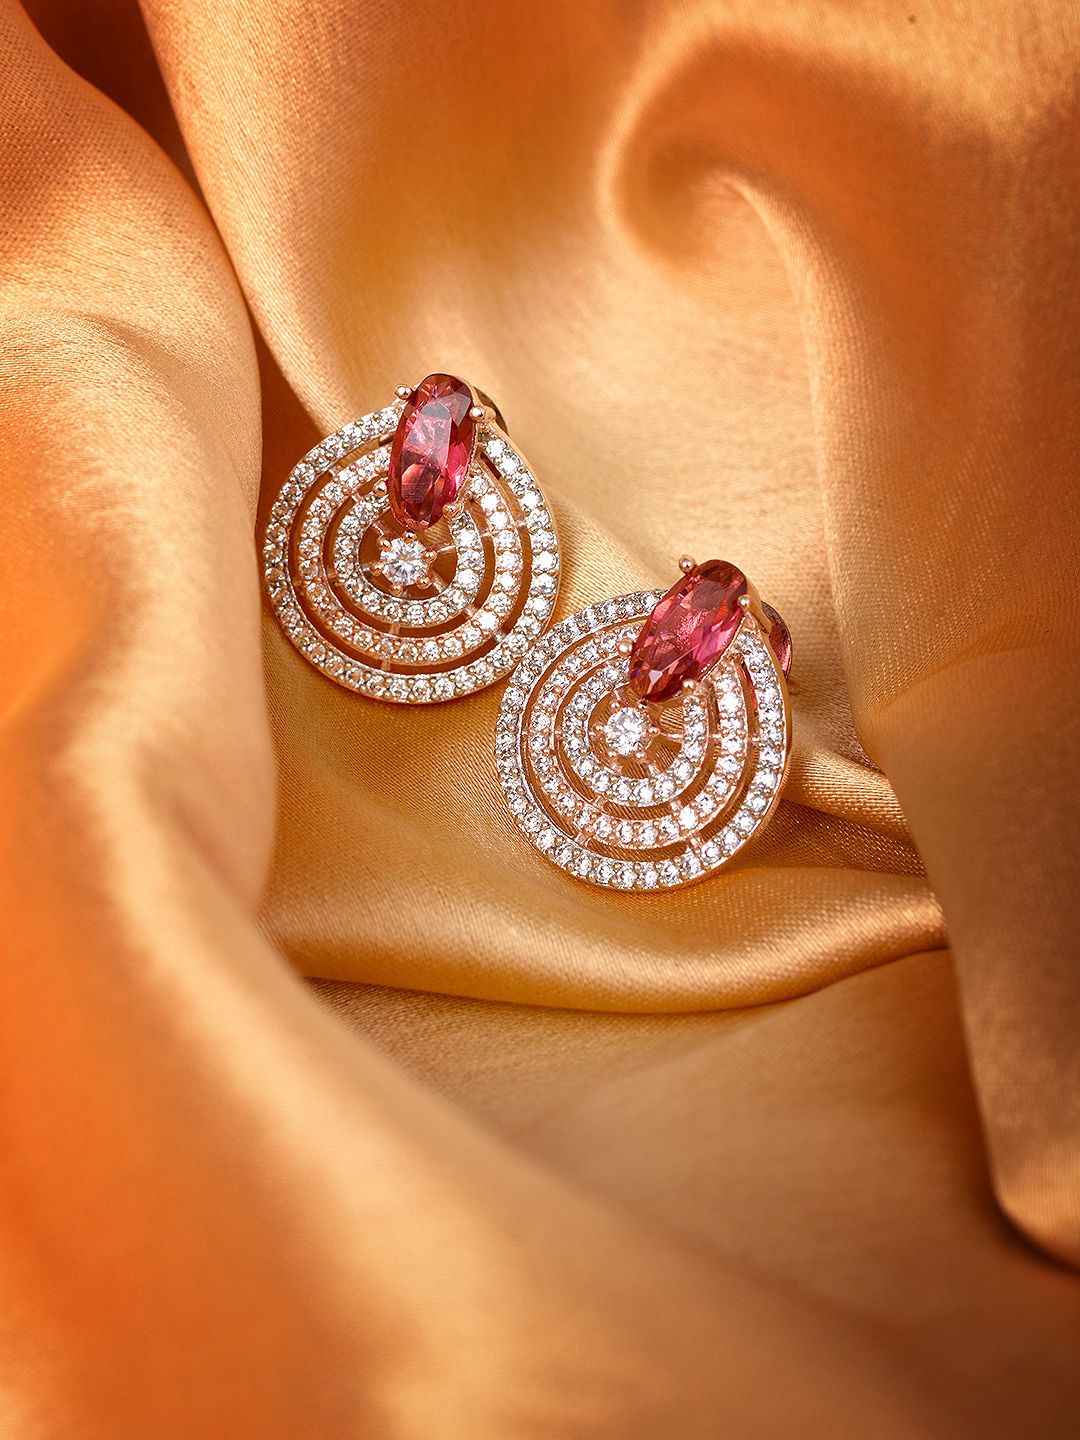 Saraf RS Jewellery Women Jewellery Magenta Contemporary Studs Earrings Price in India